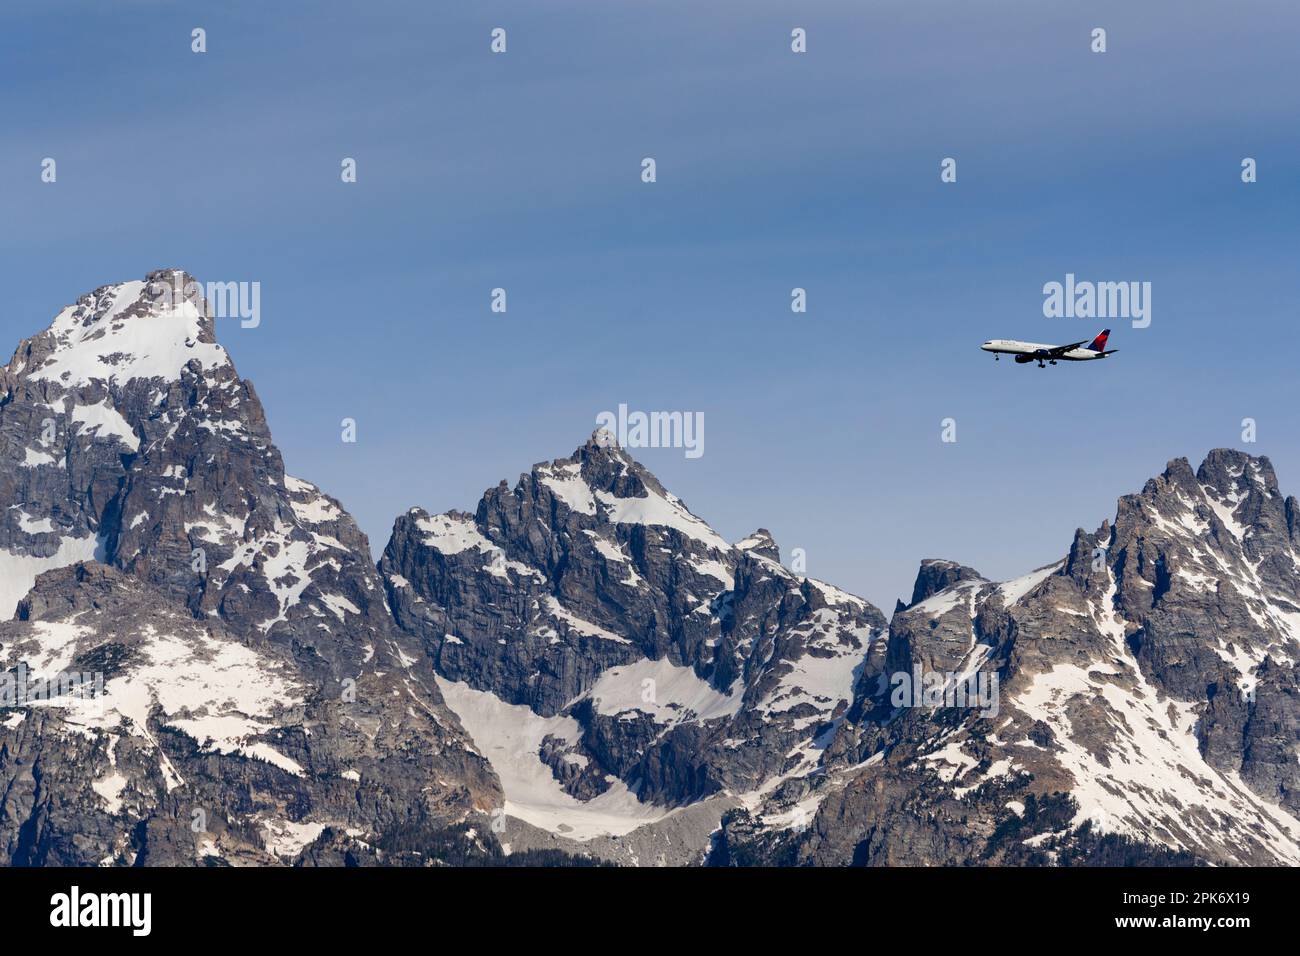 Mountains covered in snow, plane in sky, Wedge Mountain, British Columbia, Canada Stock Photo